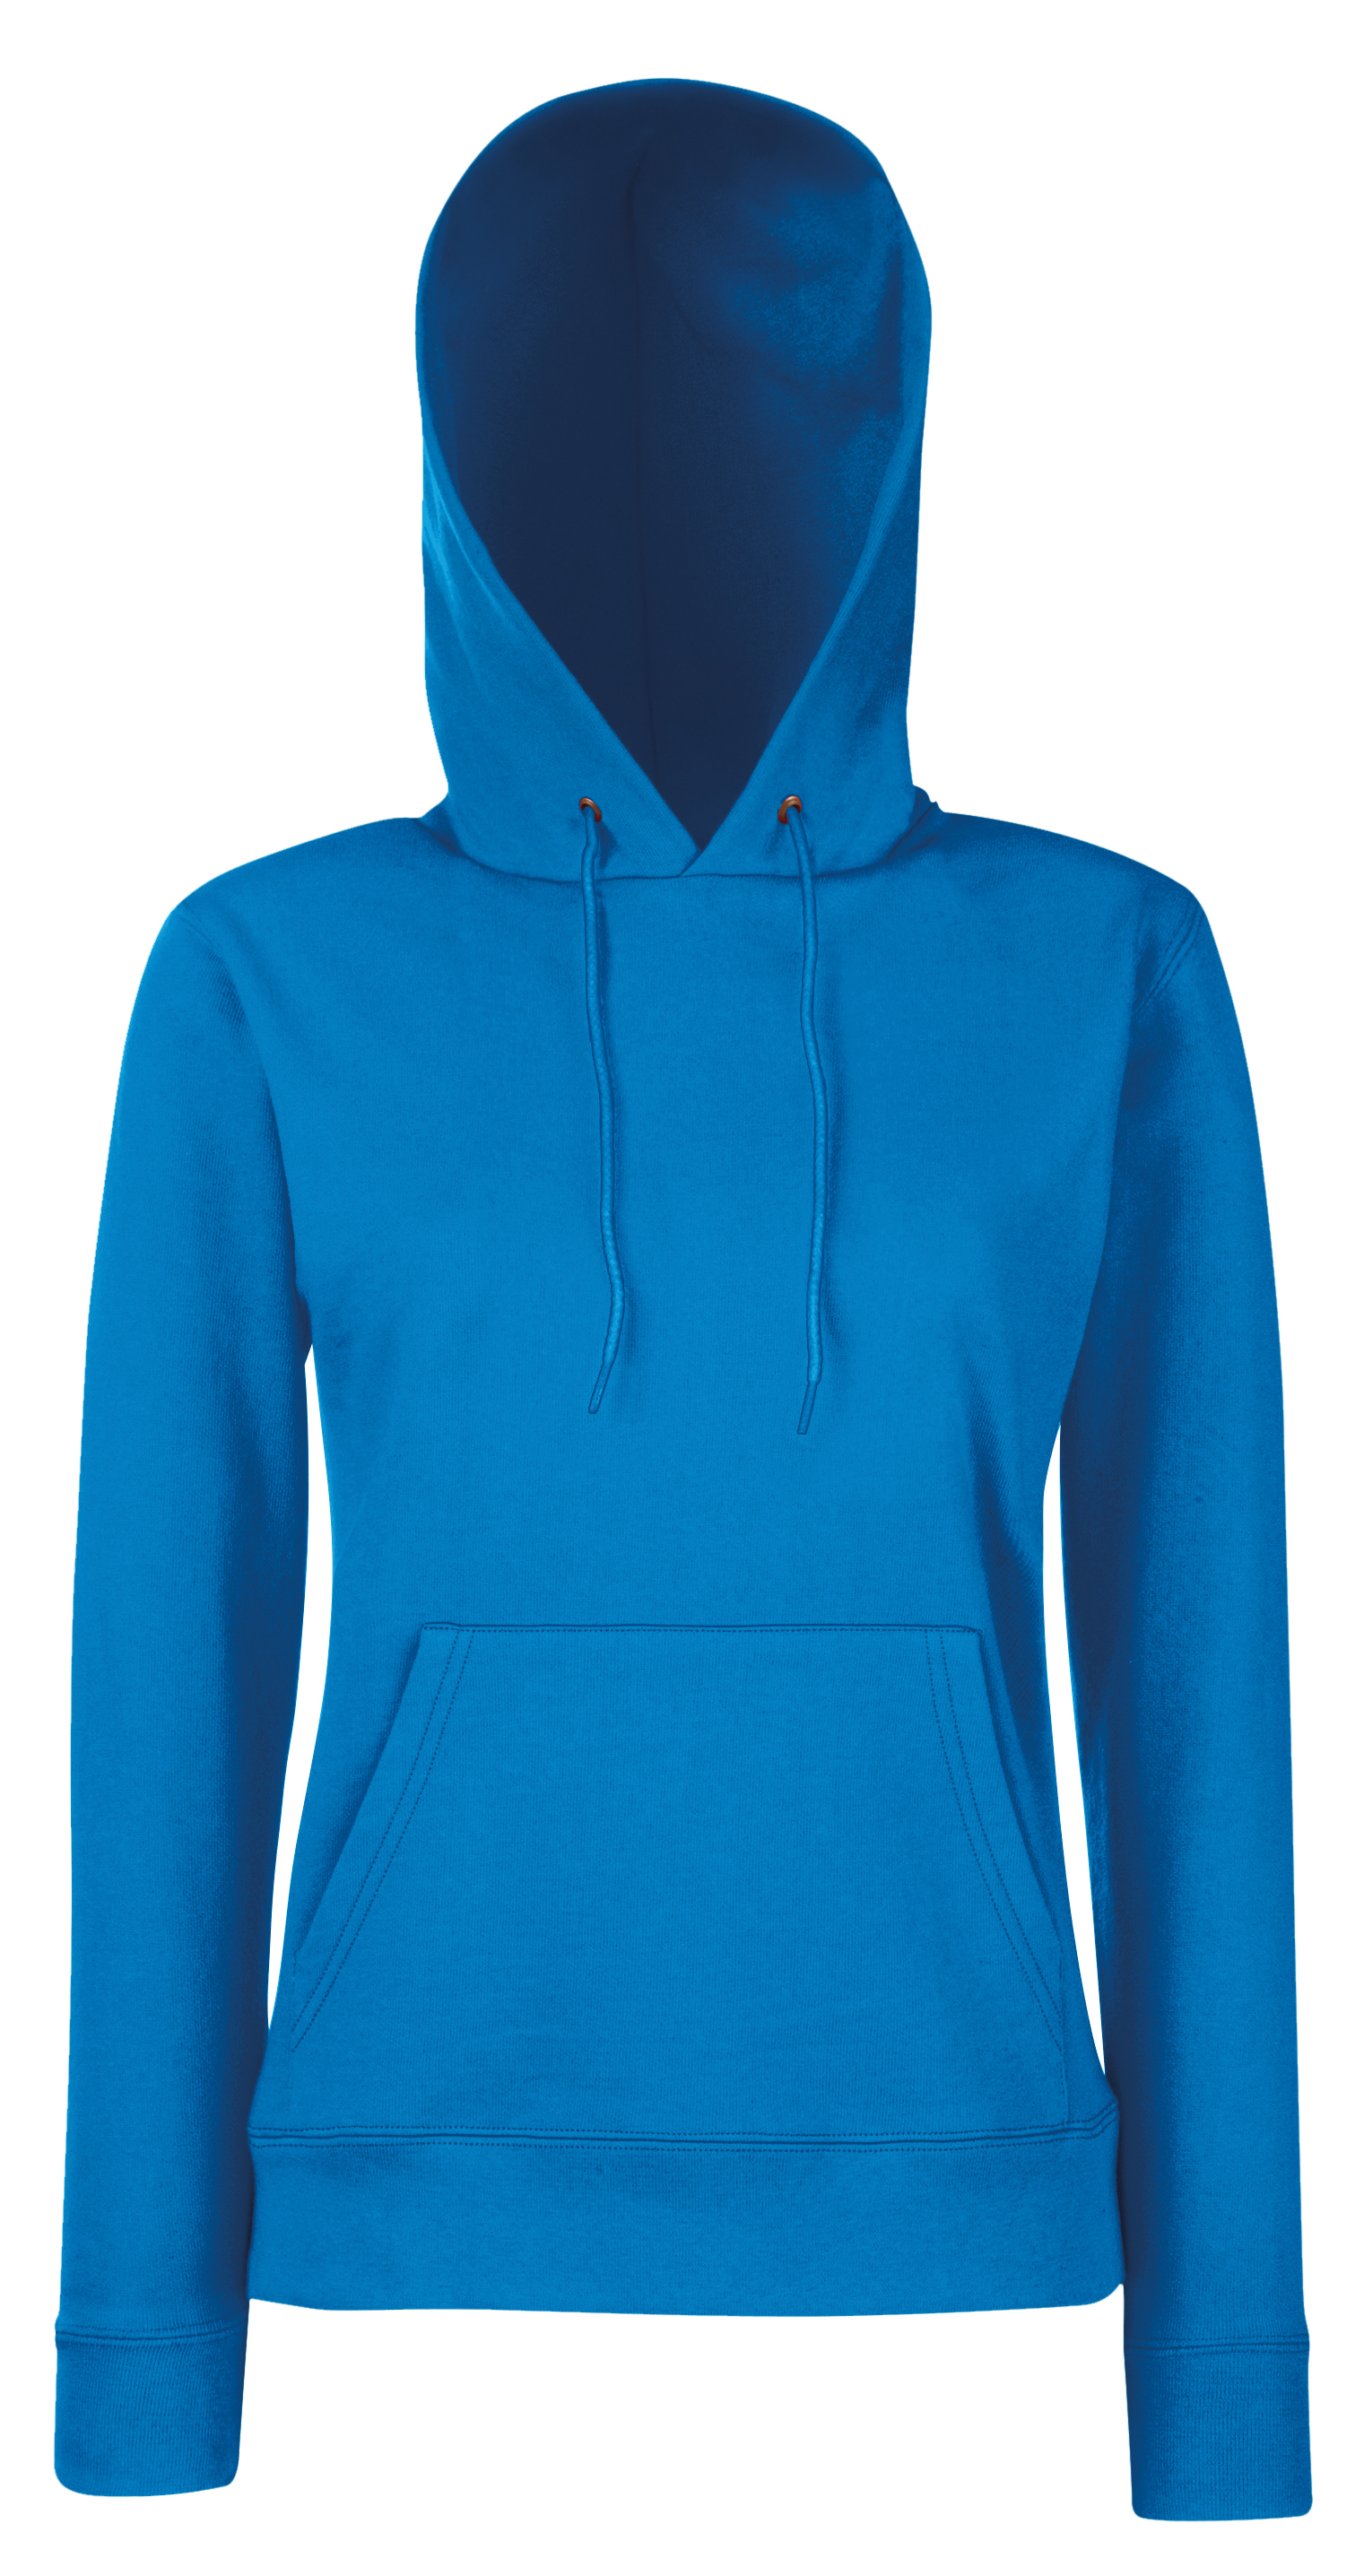 ax-httpswebsystems.s3.amazonaws.comtmp_for_downloadfruit-of-the-loom-womens-classic-80-20-hooded-sweatshirt-royal-blue.jpg